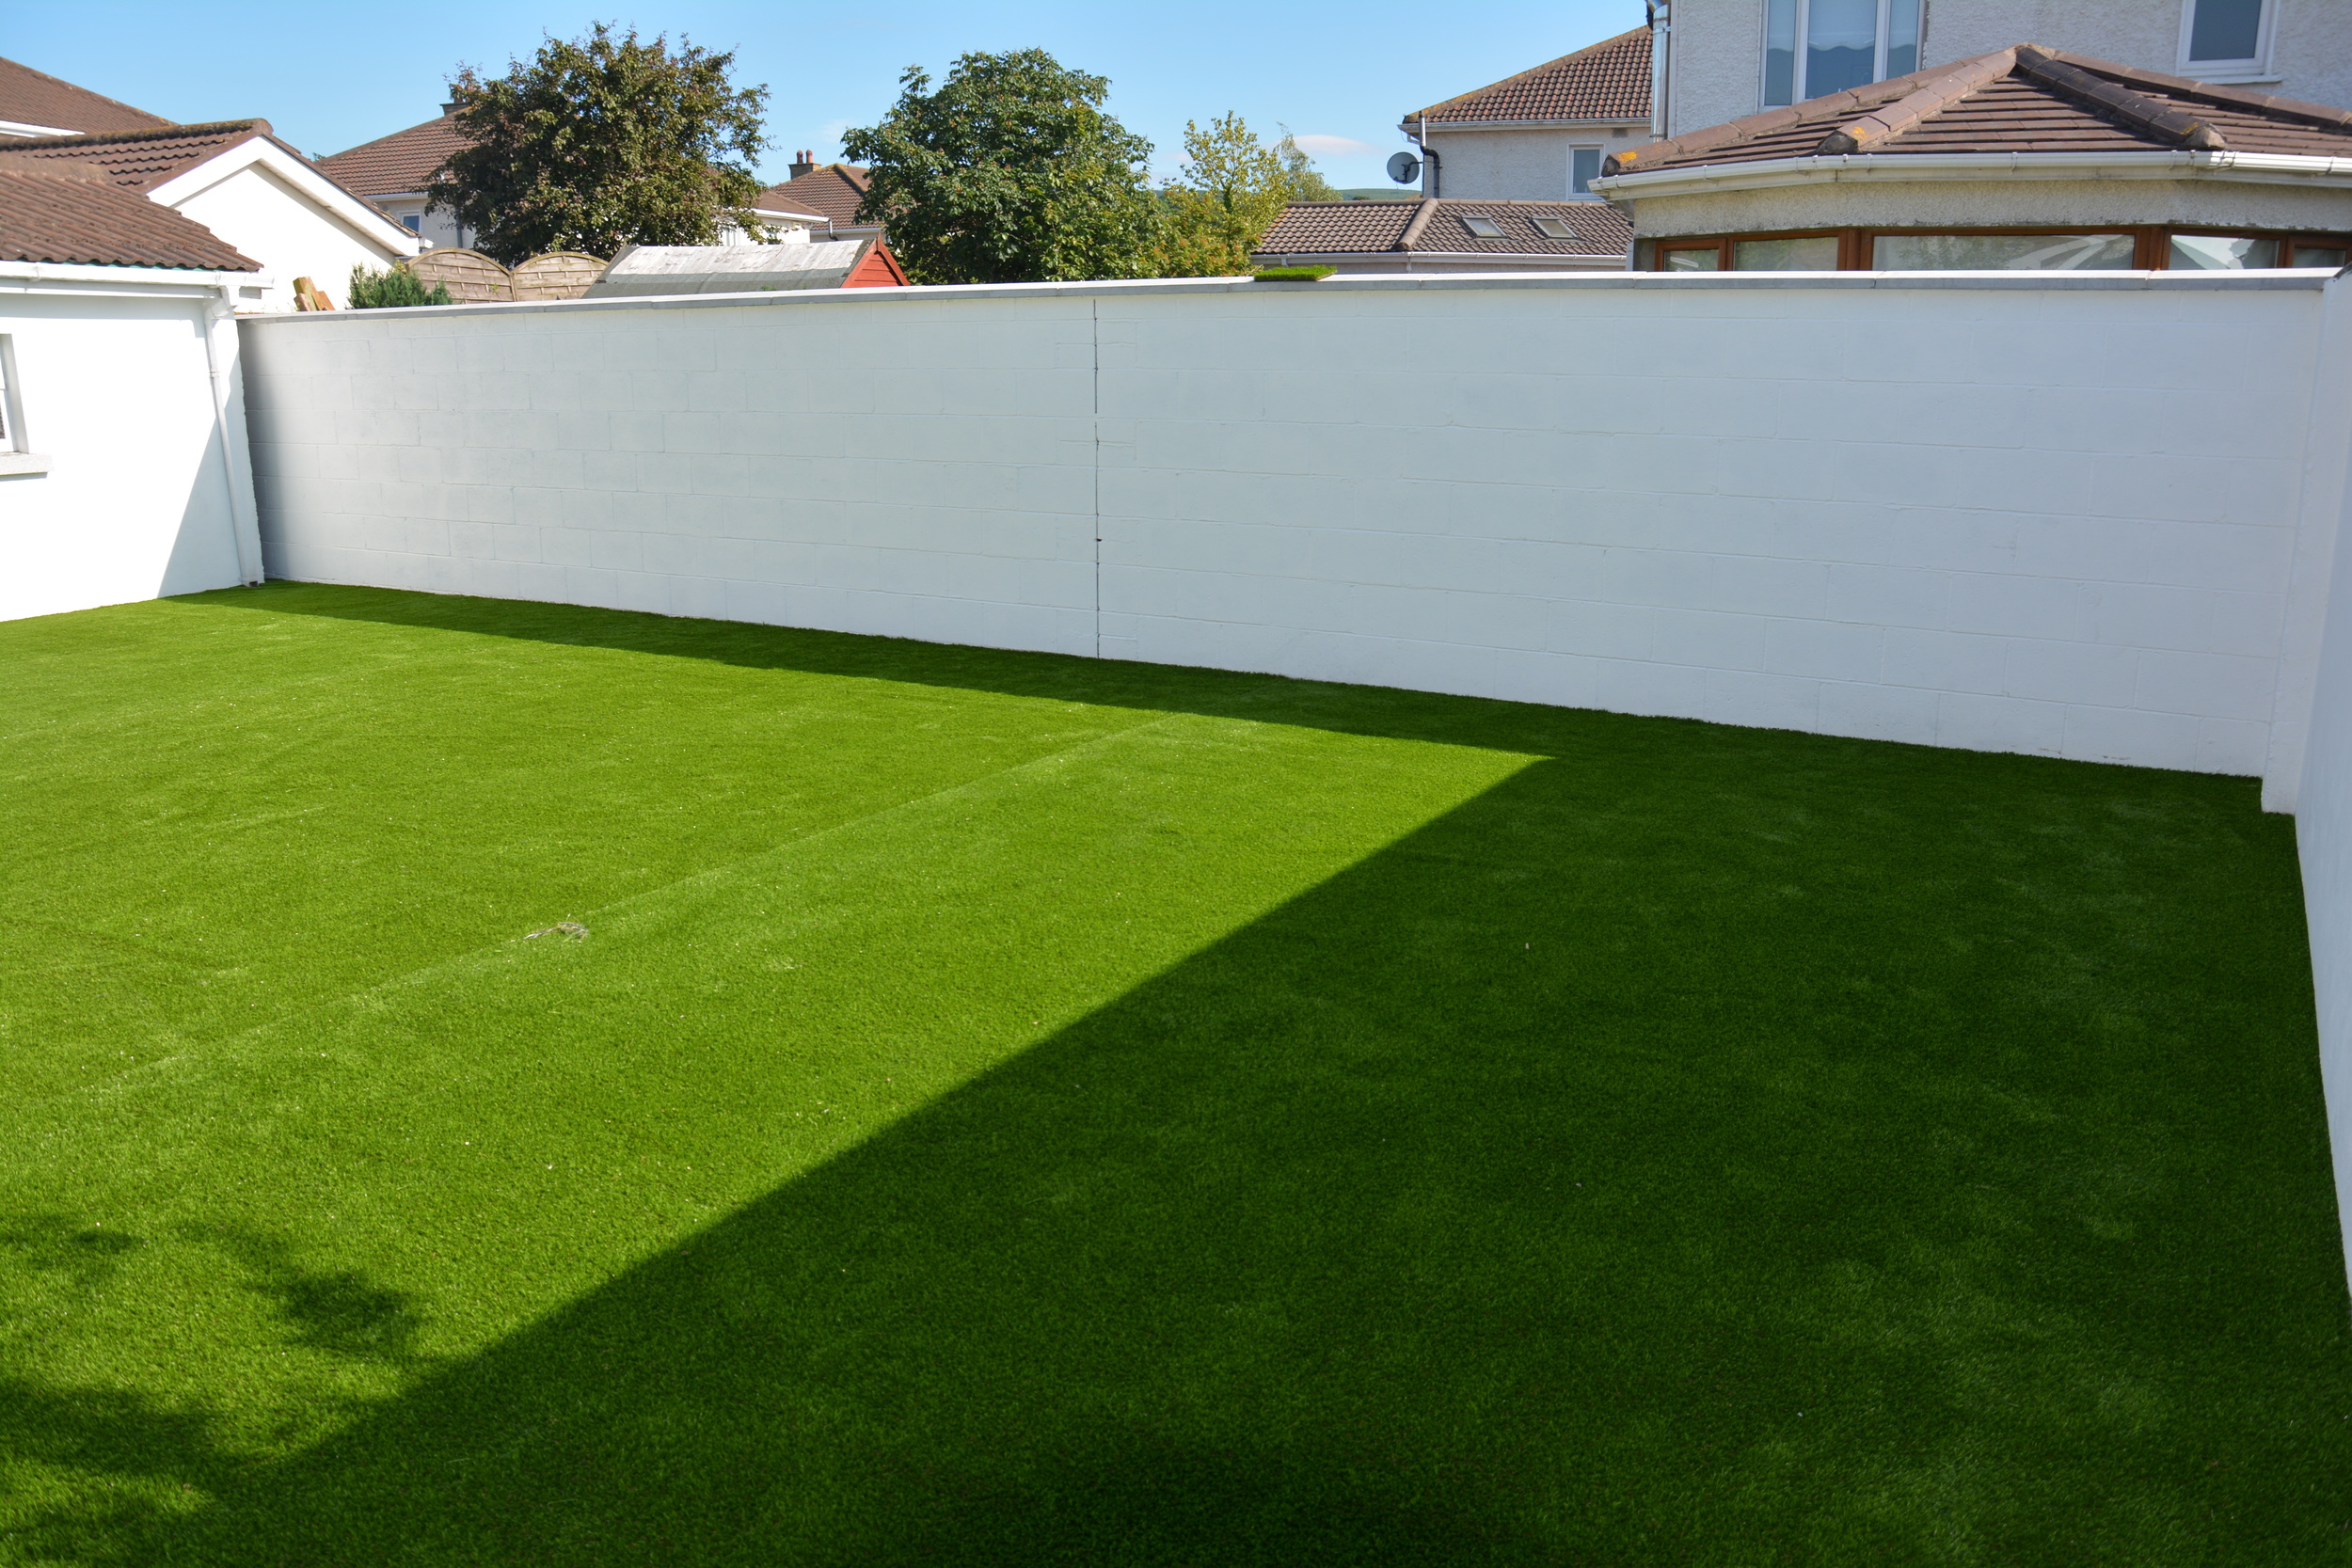 Astroturf synthetic grass